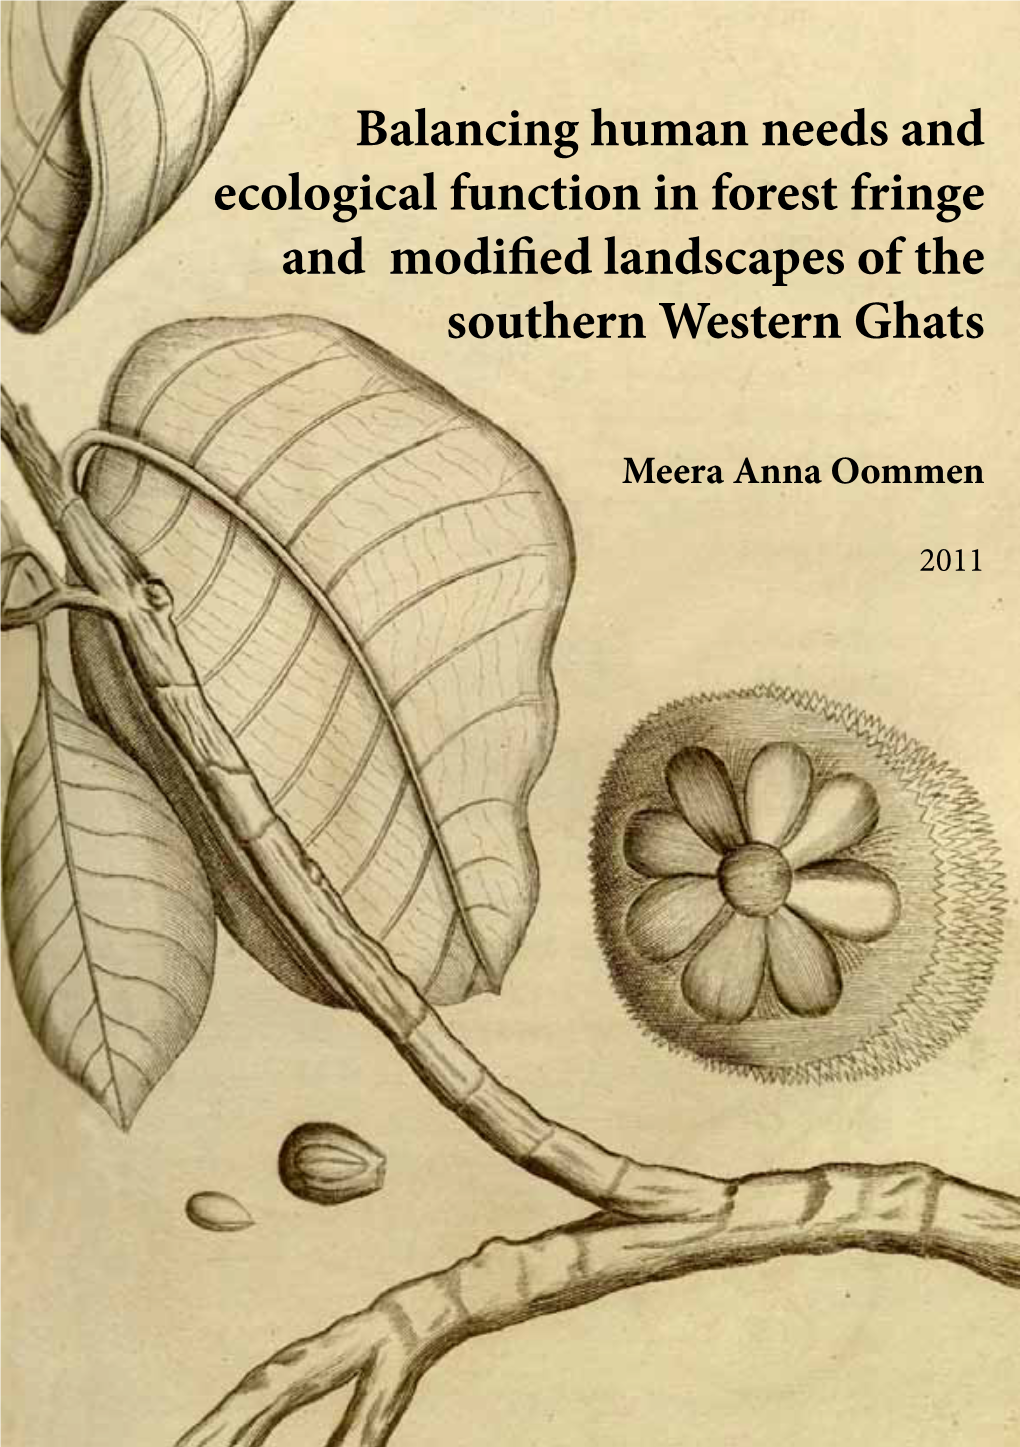 Balancing Human Needs and Ecological Function in Forest Fringe and Modified Landscapes of the Southern Western Ghats